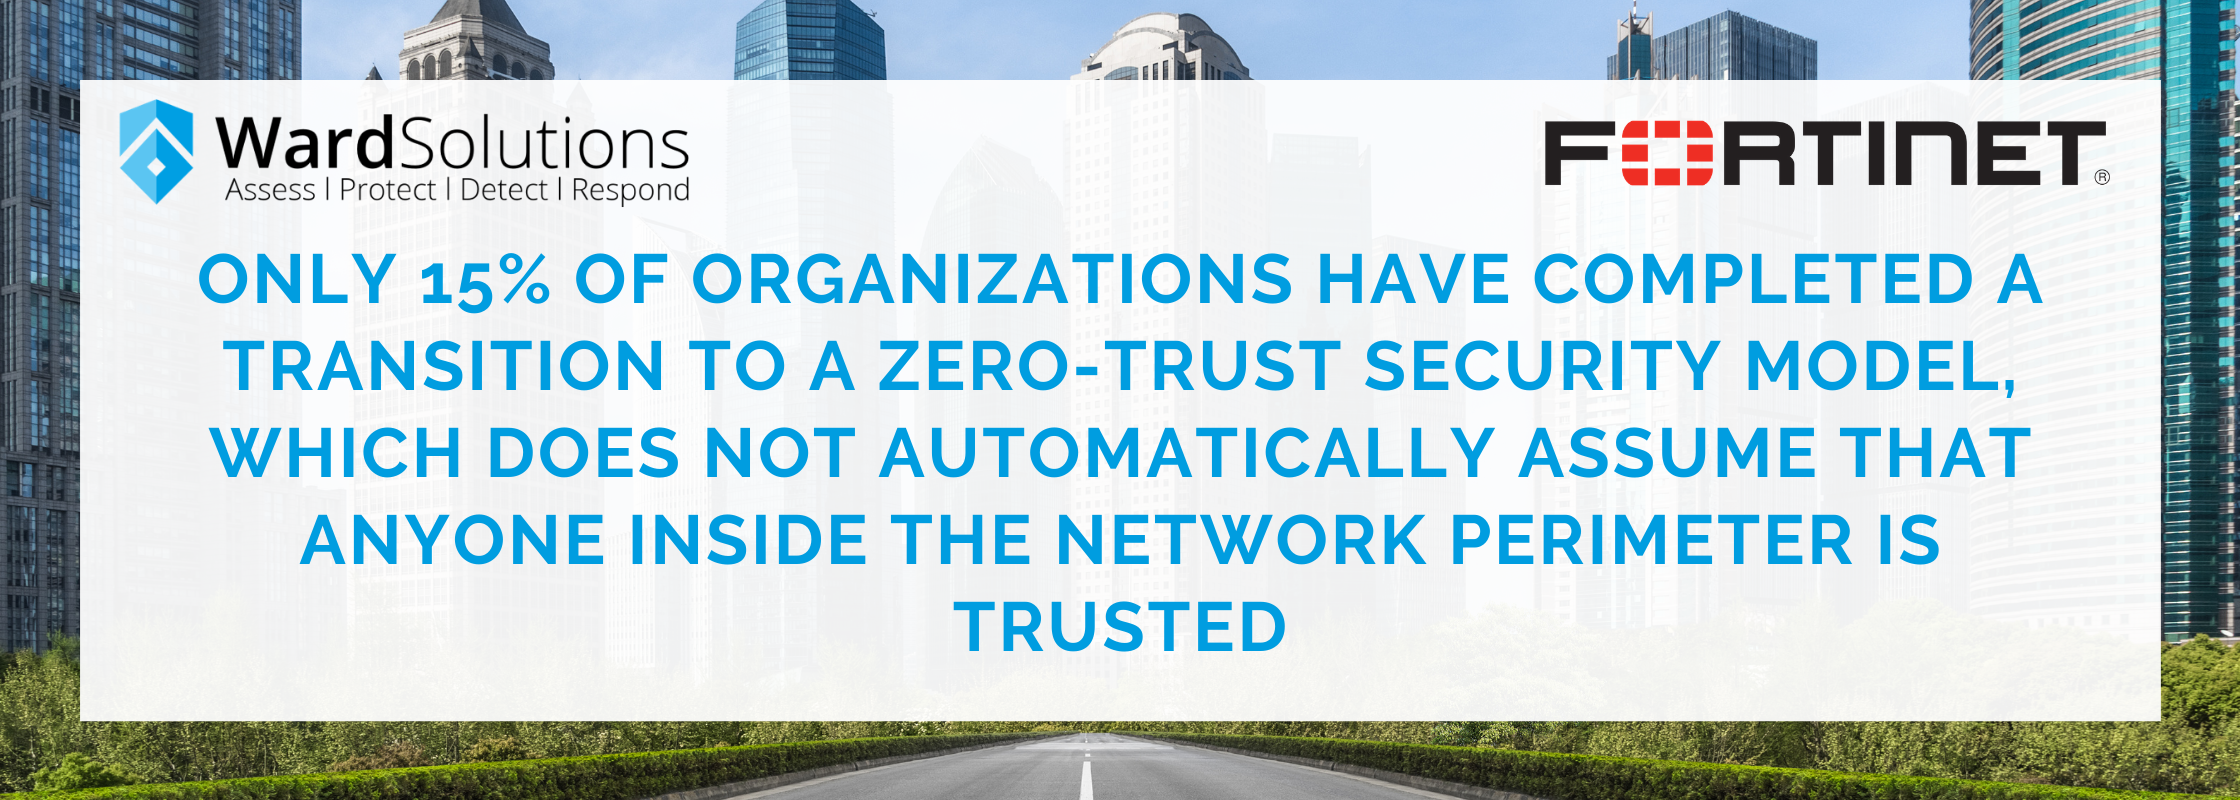 Only 15% of organizations have completed a transition to a zero-trust security model, which does not automatically assume that anyone inside the network perimeter is trusted